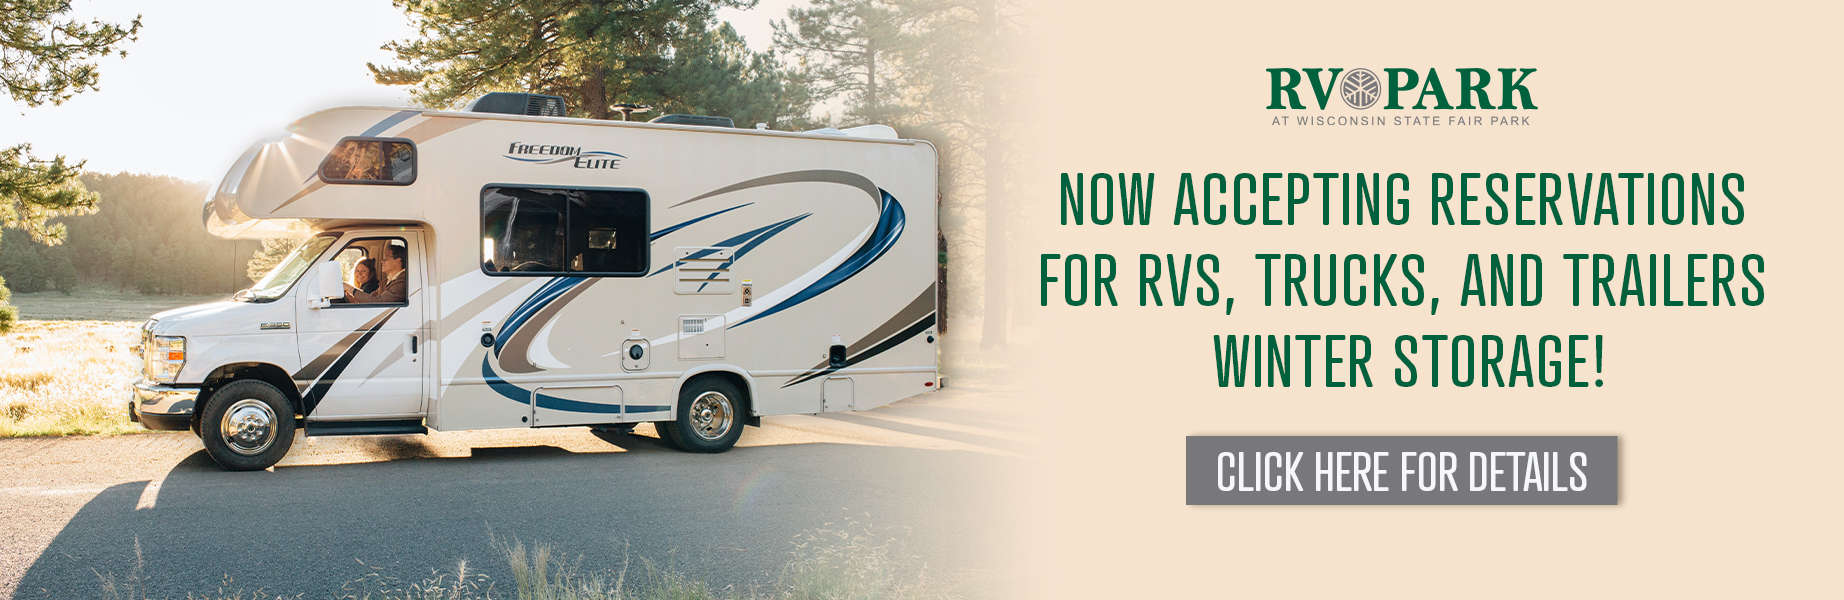 Now accepting reservations for RVs, trucks, and trailers winter storage! Click here for details.